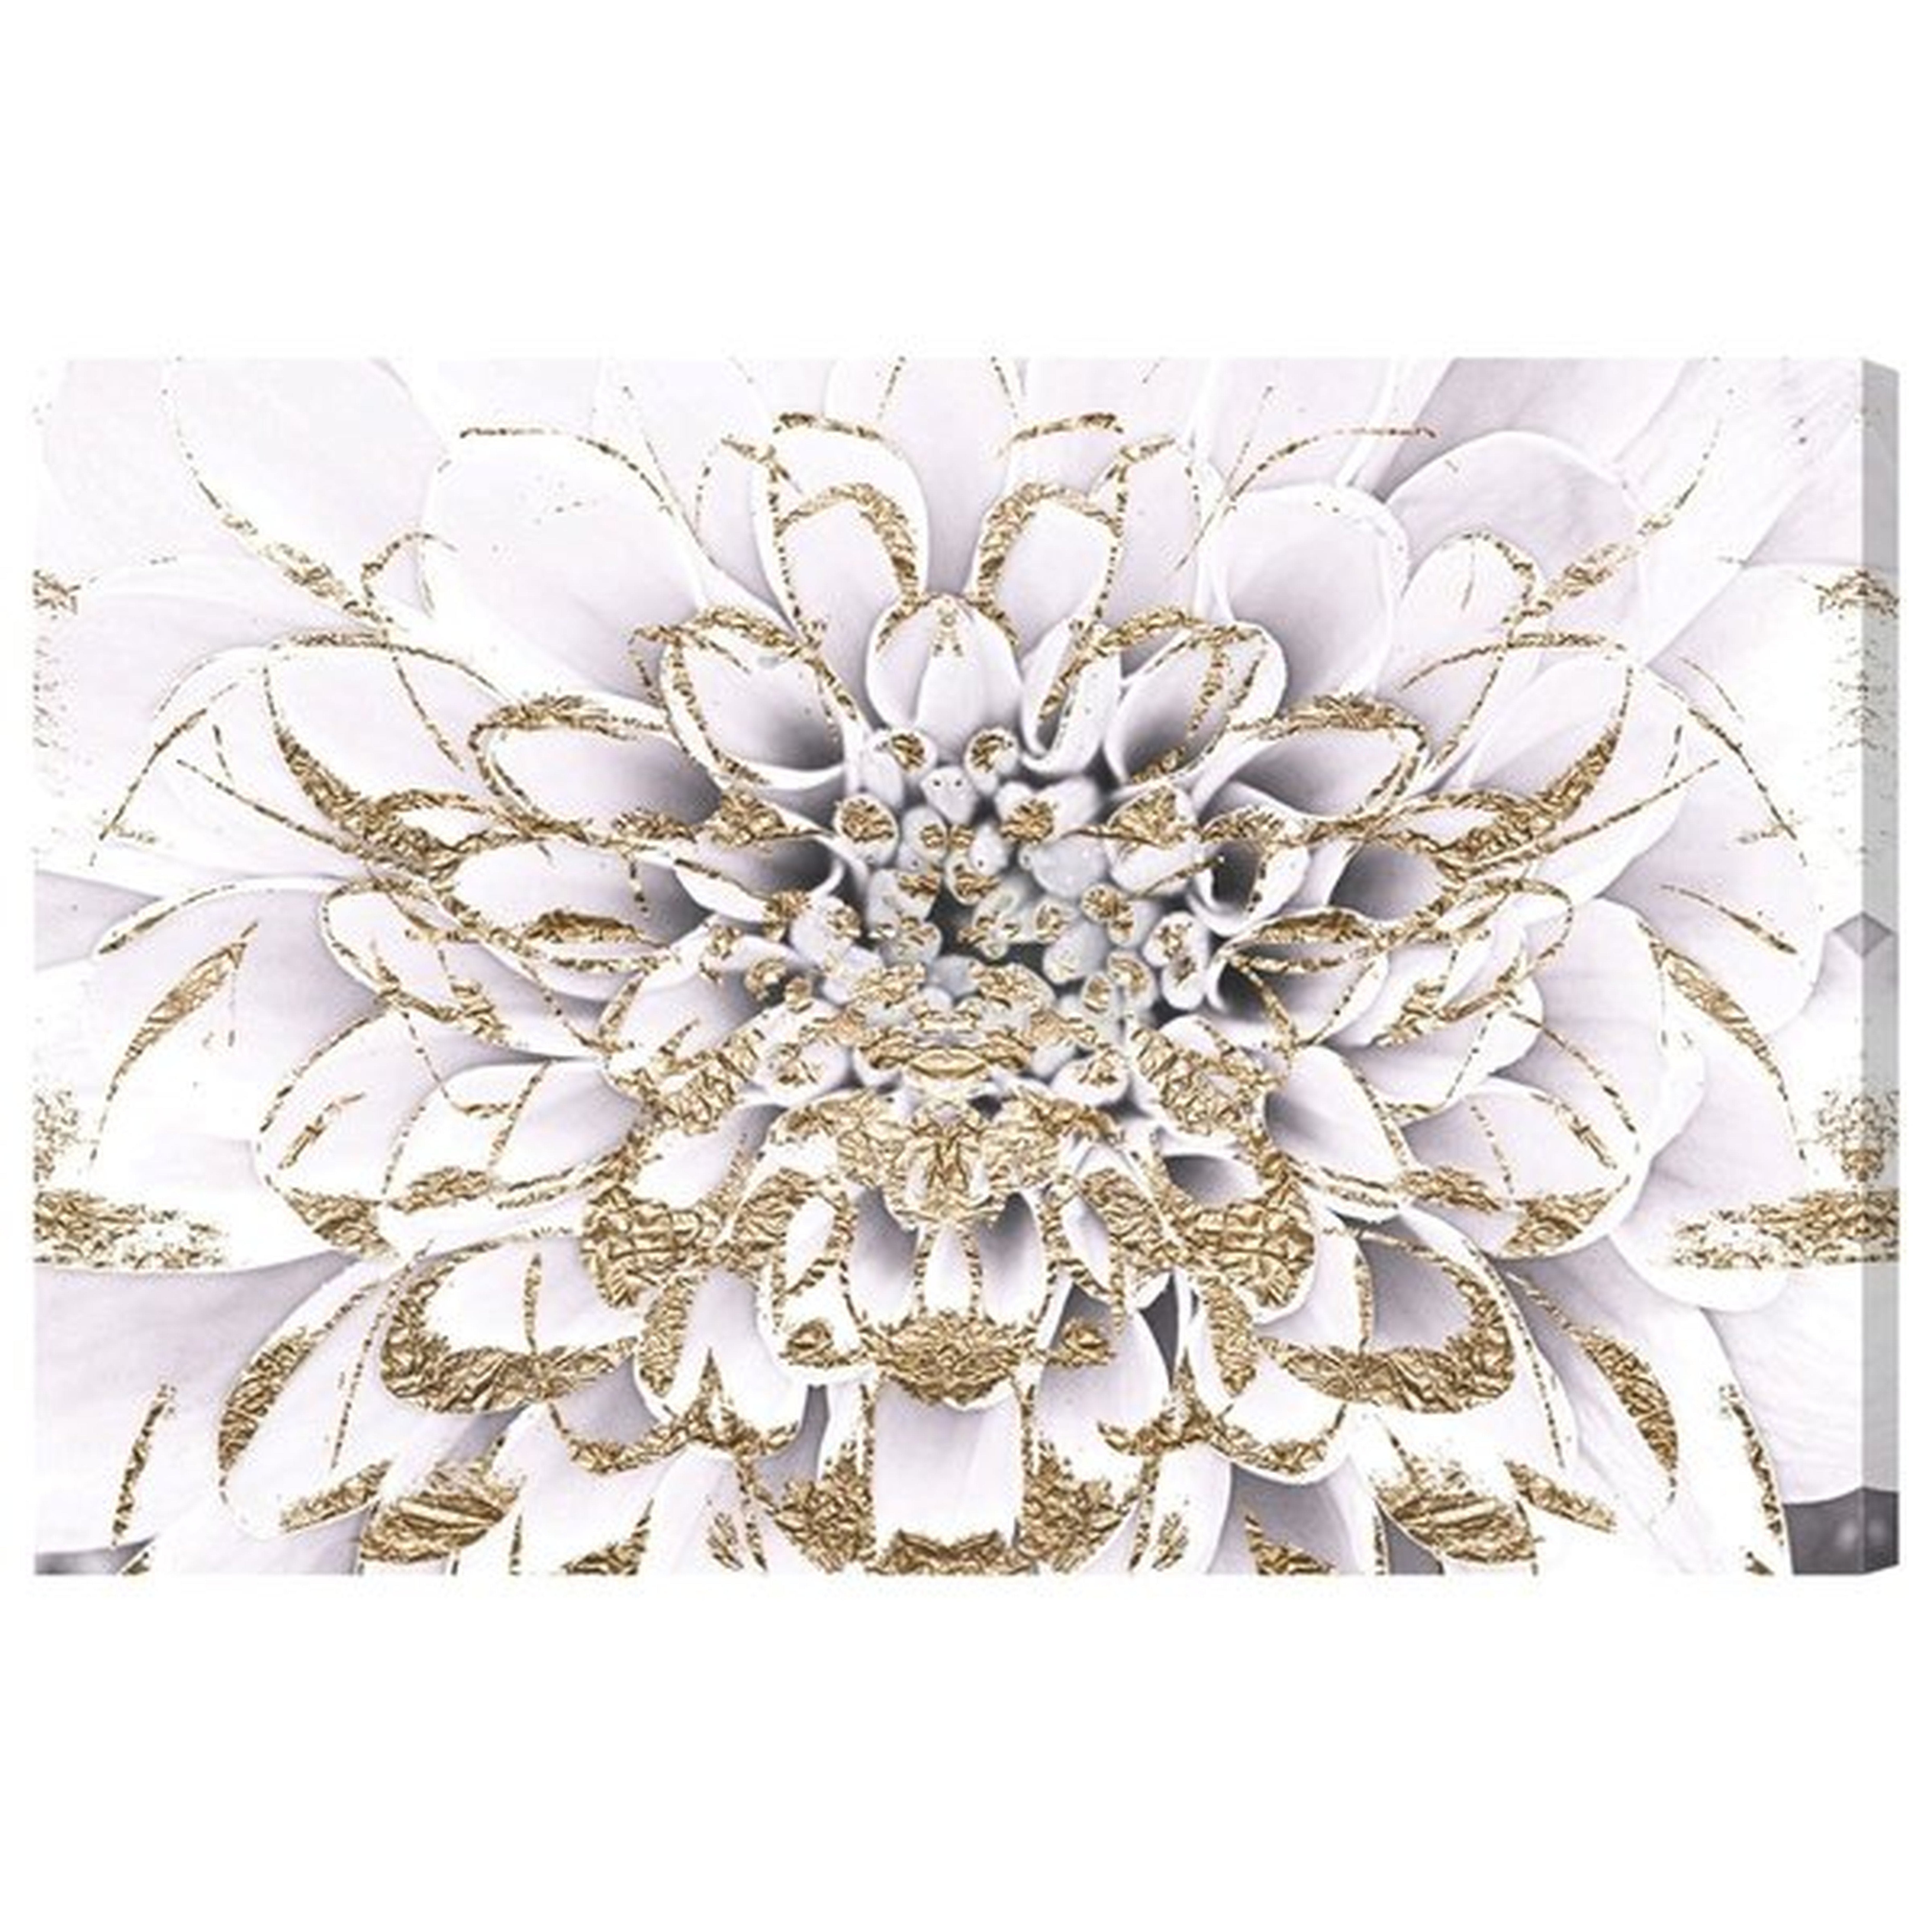 'Floralia Blanc Floral and Botanical Art' Graphic Art on Canvas in White/Gold/Yellow - Wayfair